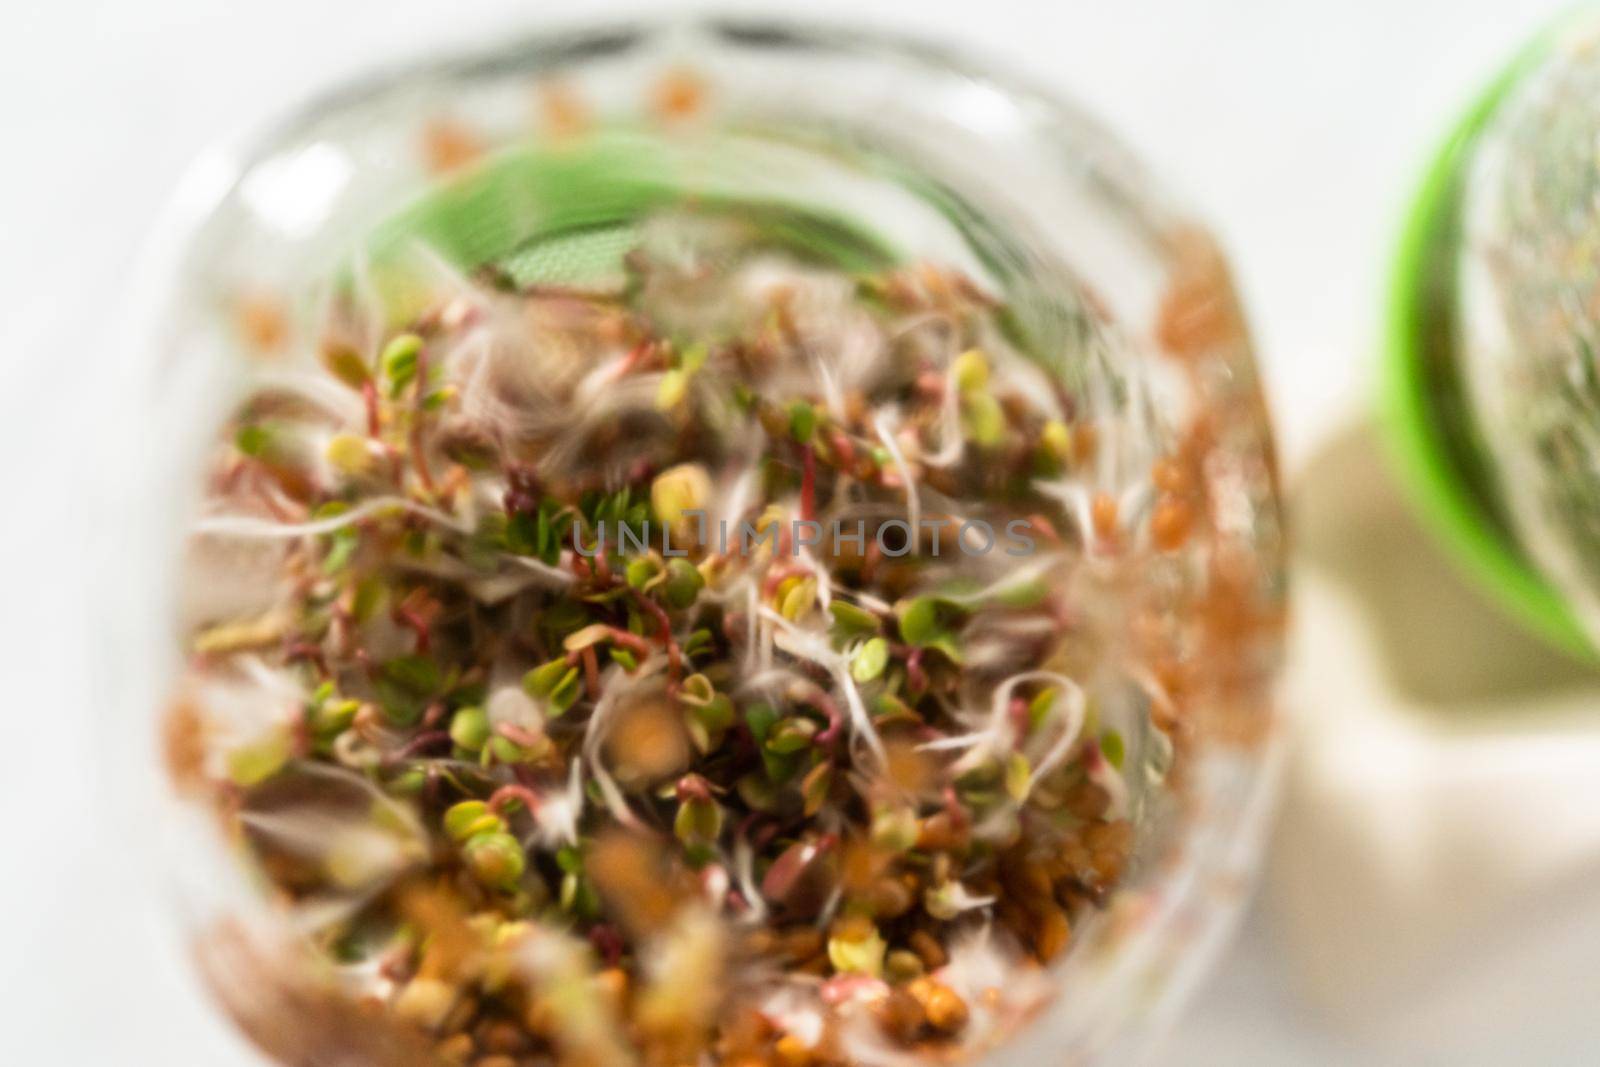 Growing sprouts in a jar by arinahabich